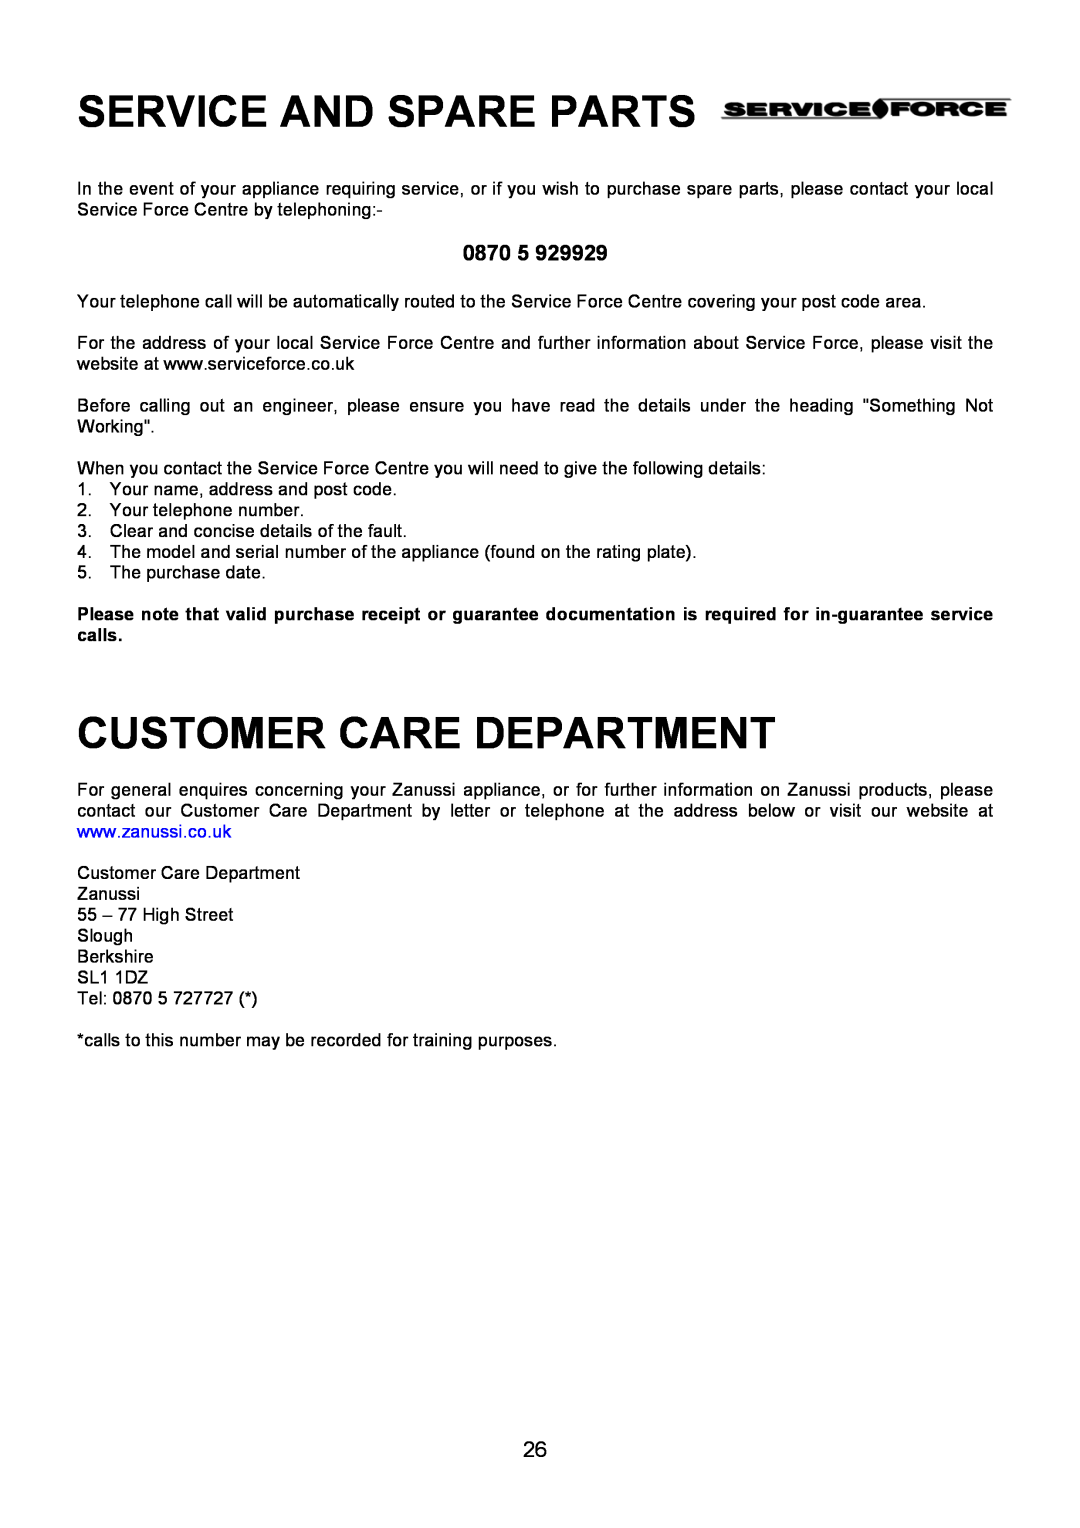 Zanussi ZCM 7901 manual 0870, Service And Spare Parts, Customer Care Department 